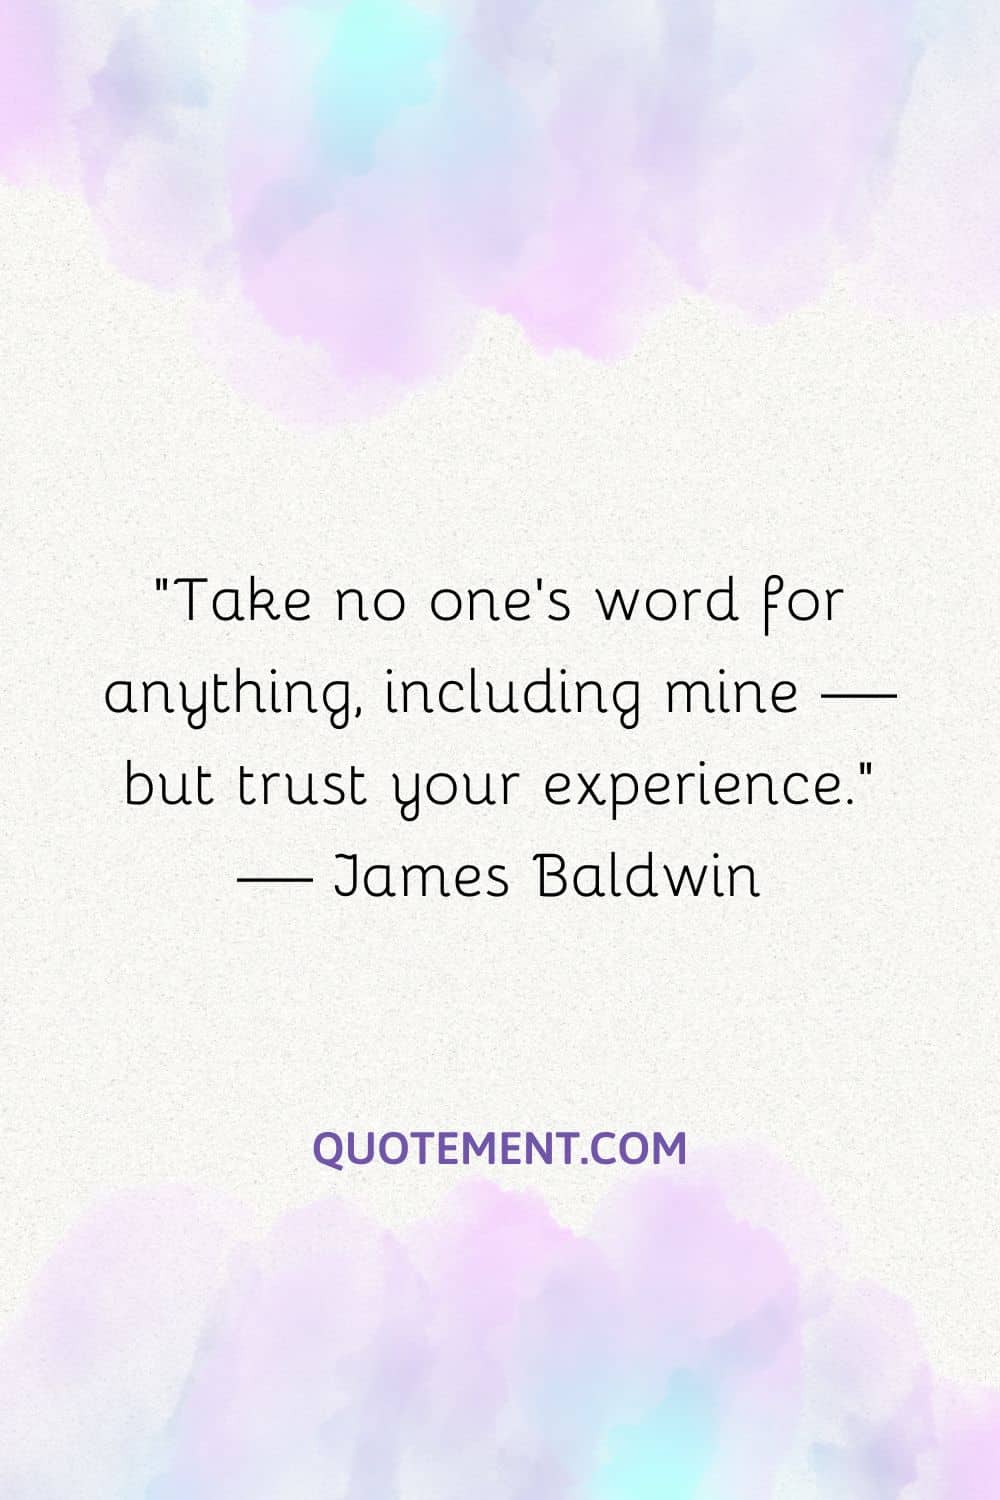 Take no one’s word for anything, including mine — but trust your experience